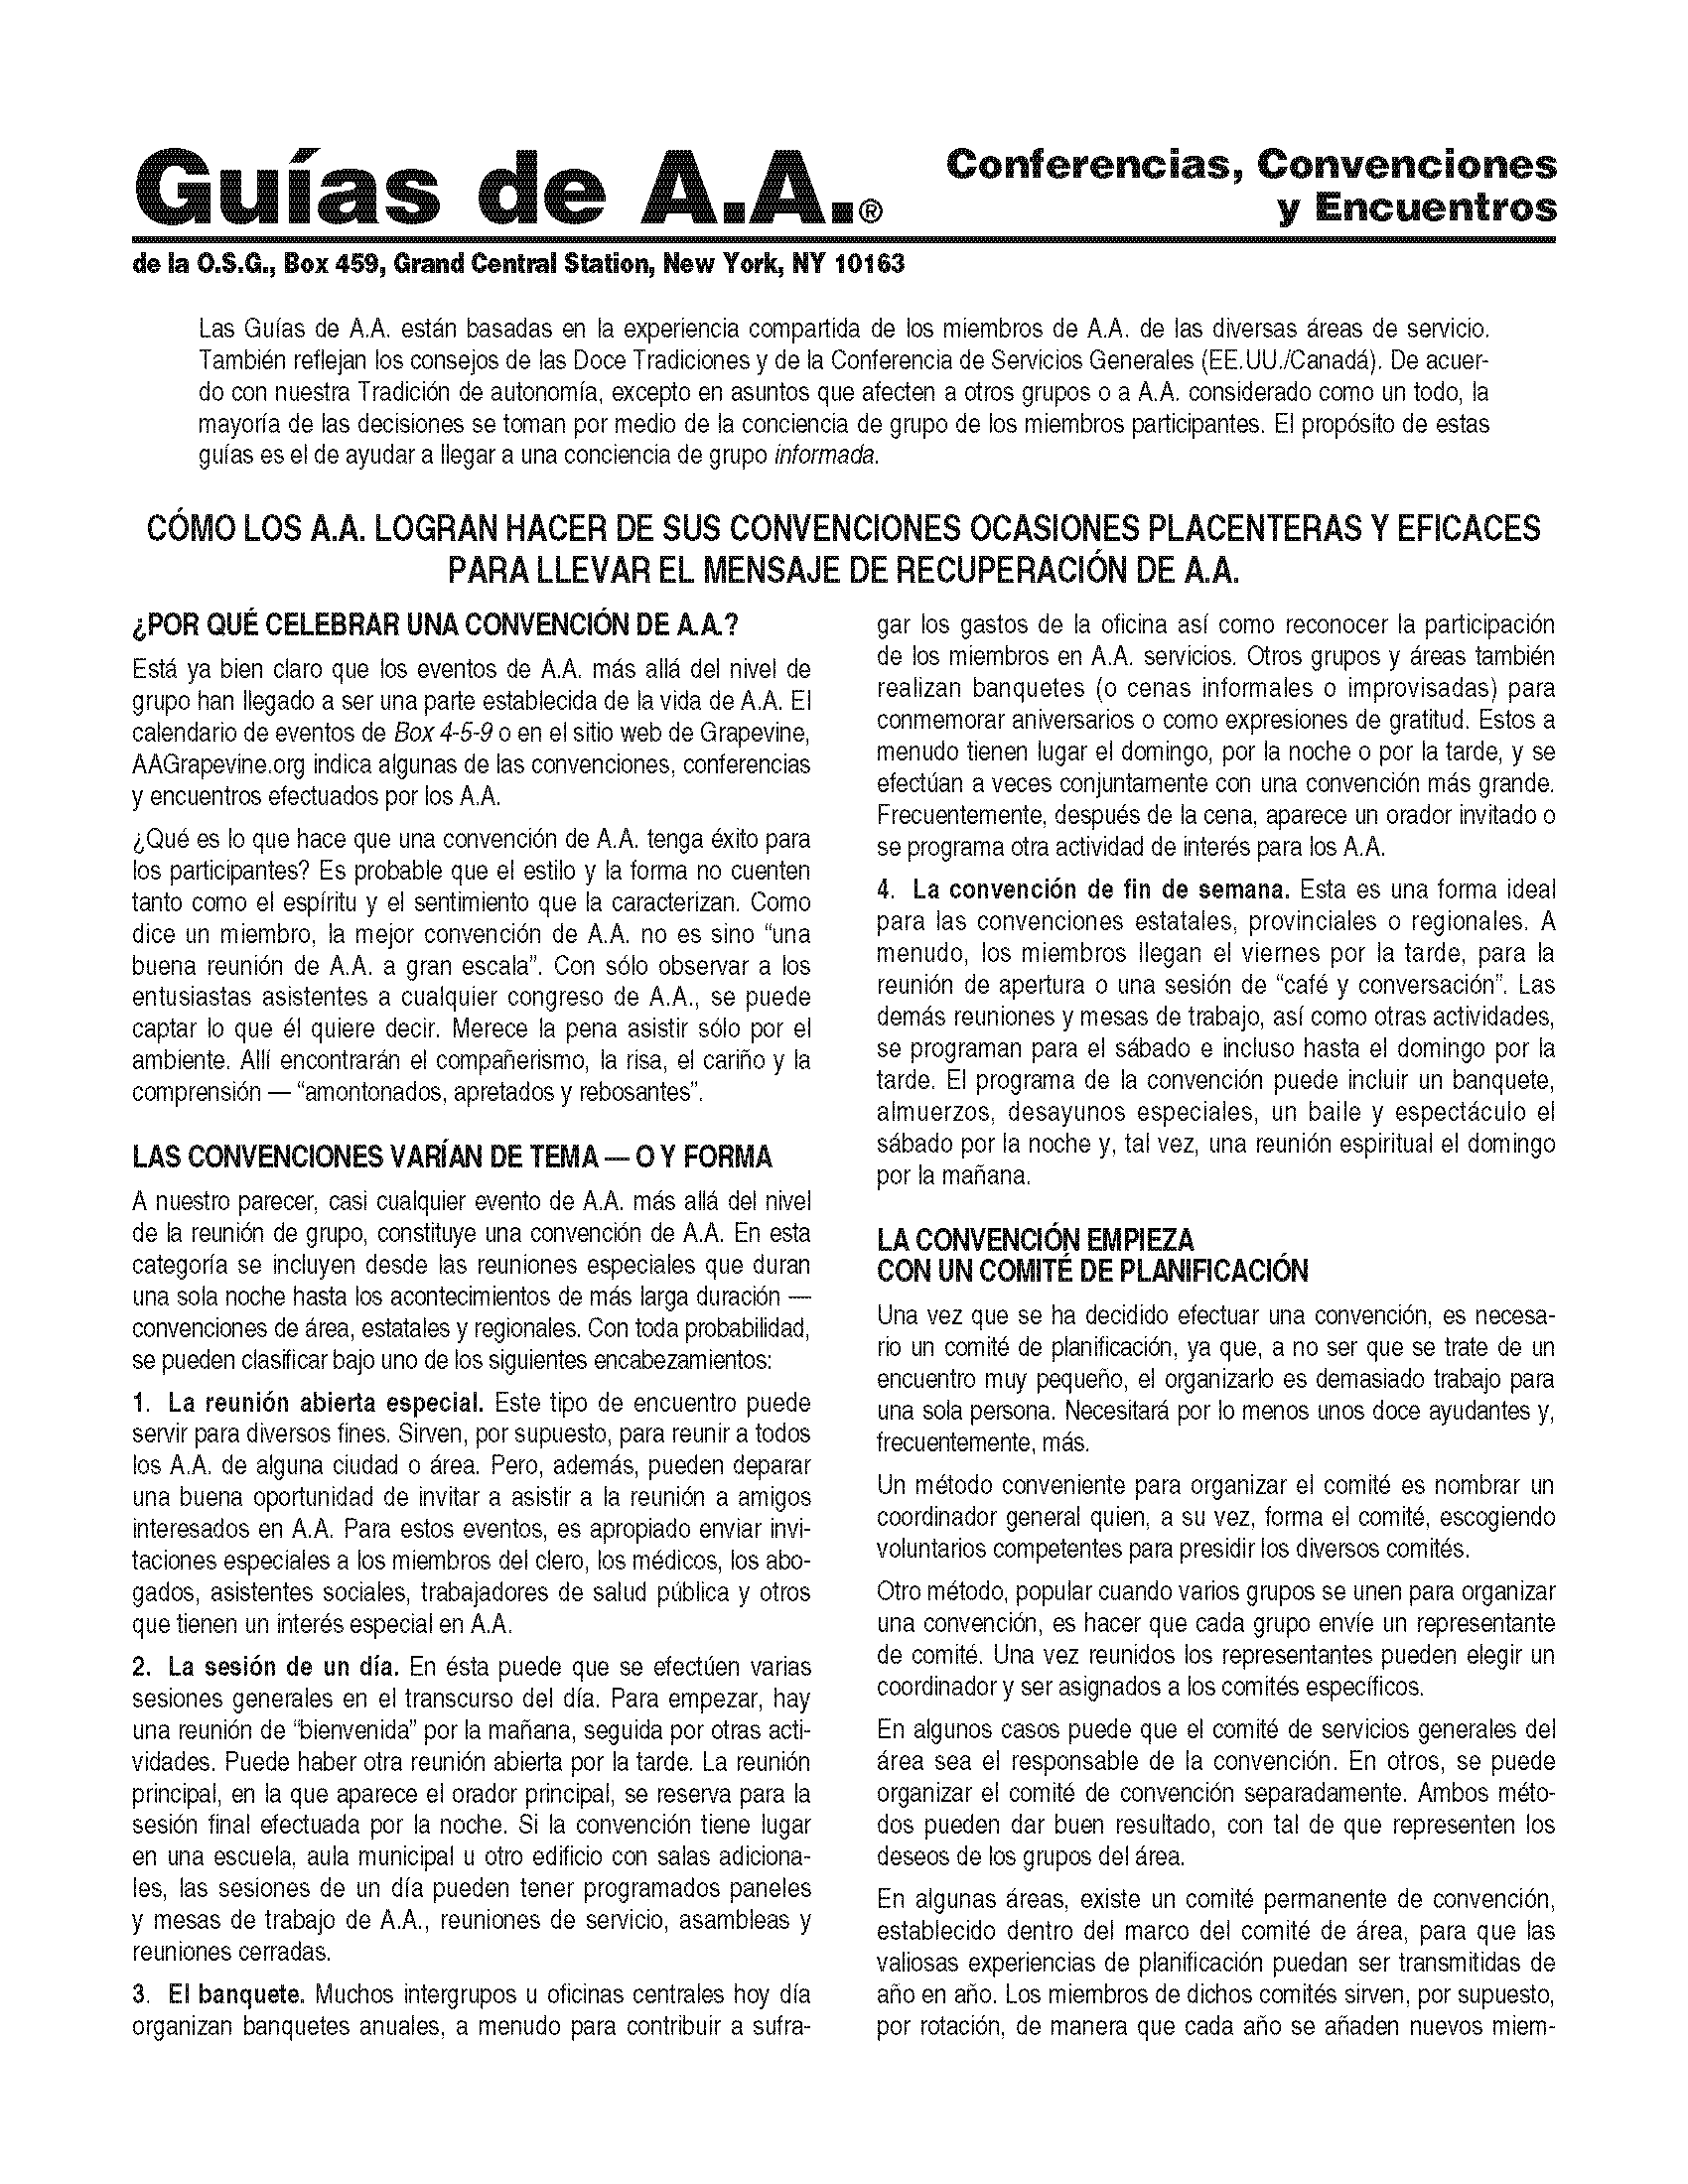 smg-04_conferenceandconv_Page_1